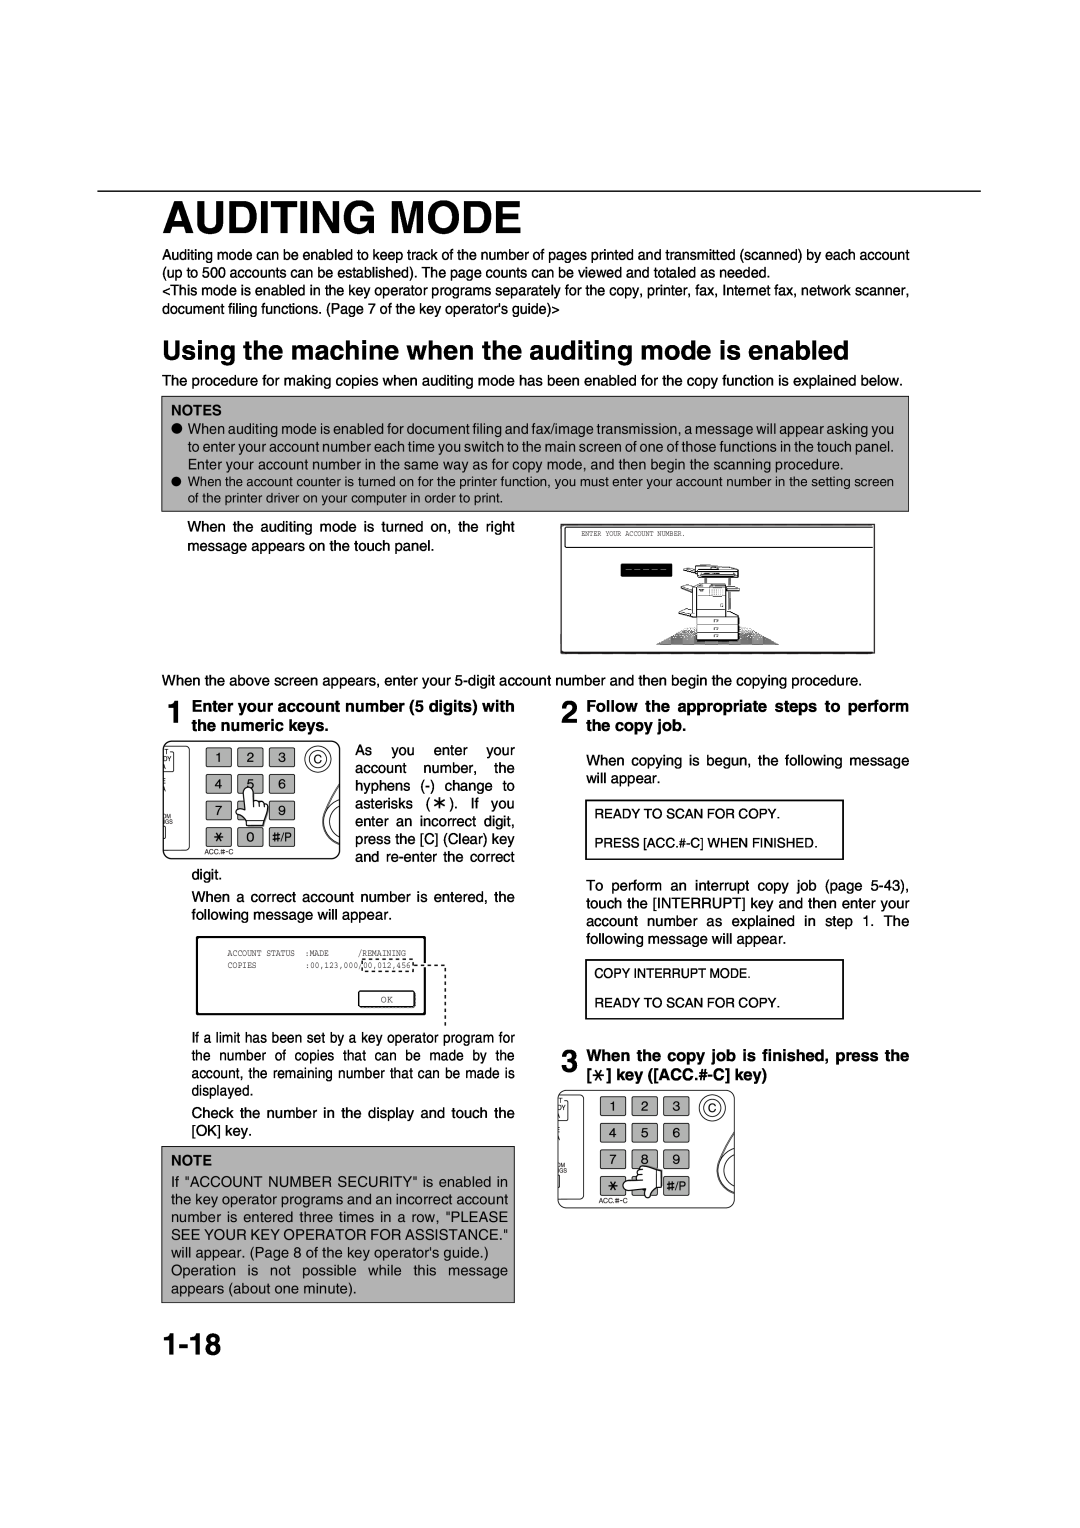 Sharp AR-M451N specifications Auditing Mode, 1-18, Using the machine when the auditing mode is enabled 